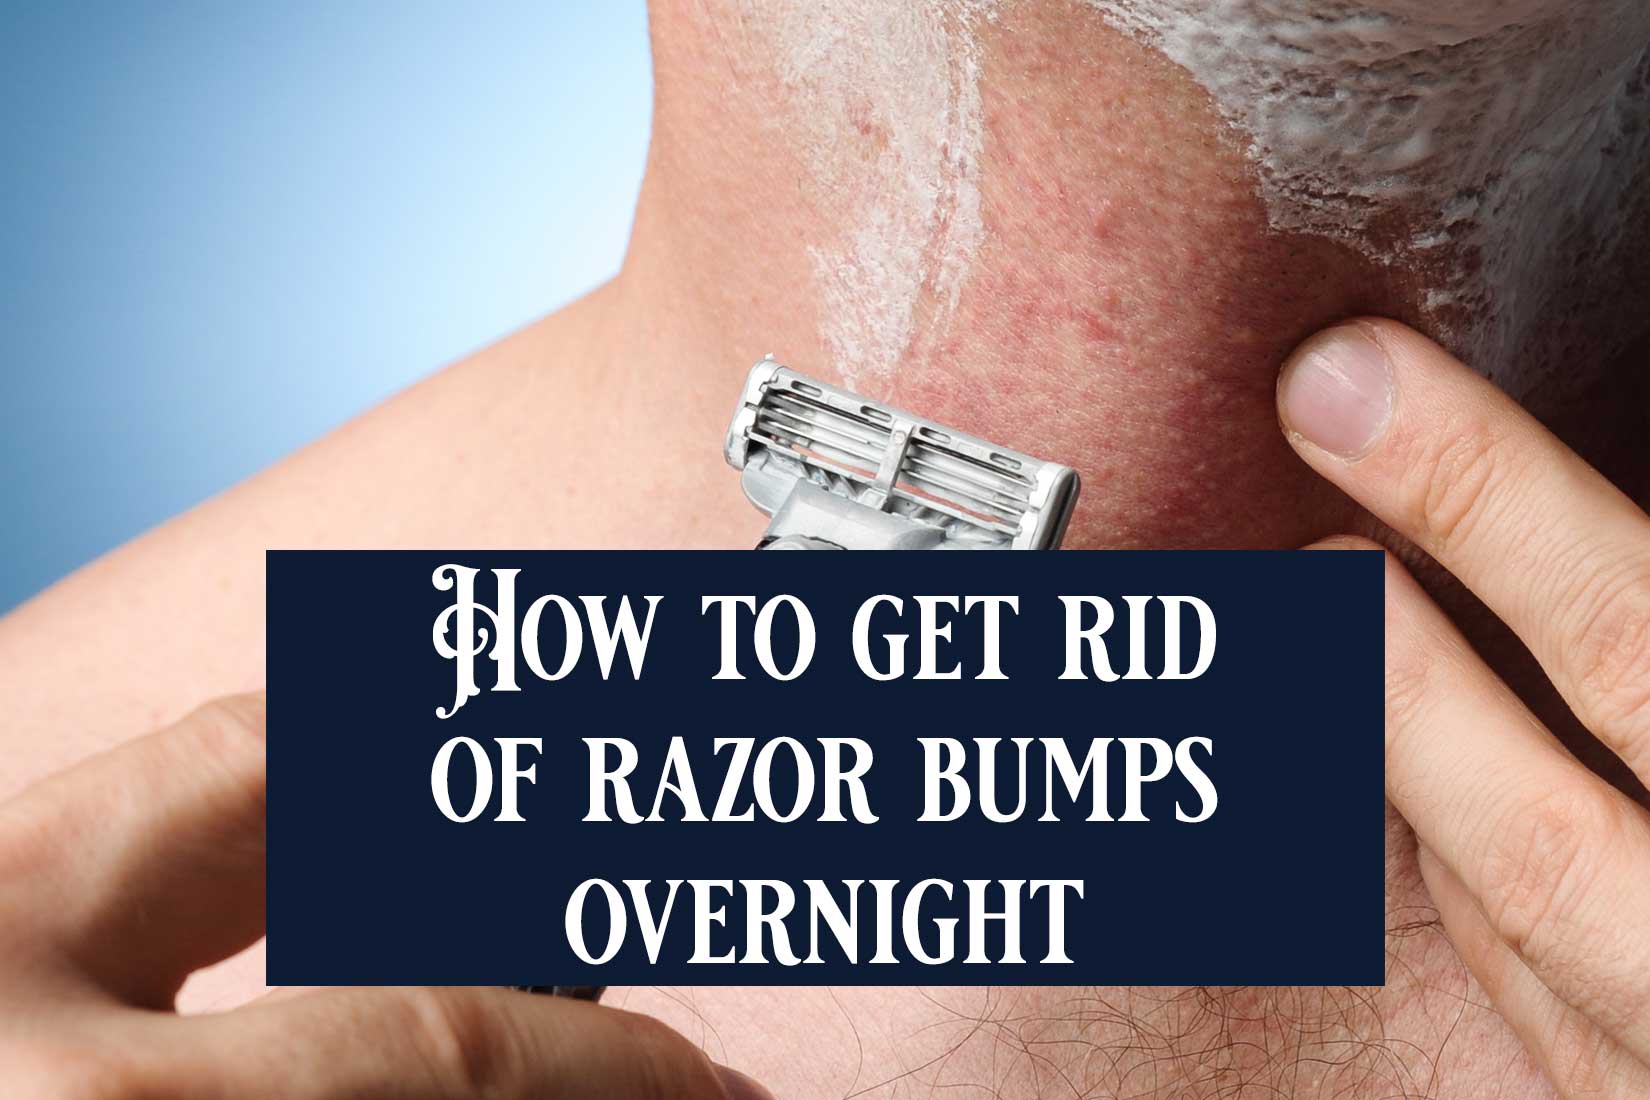 How To Get Rid Of Razor Bumps Overnight The Artisans Republic 